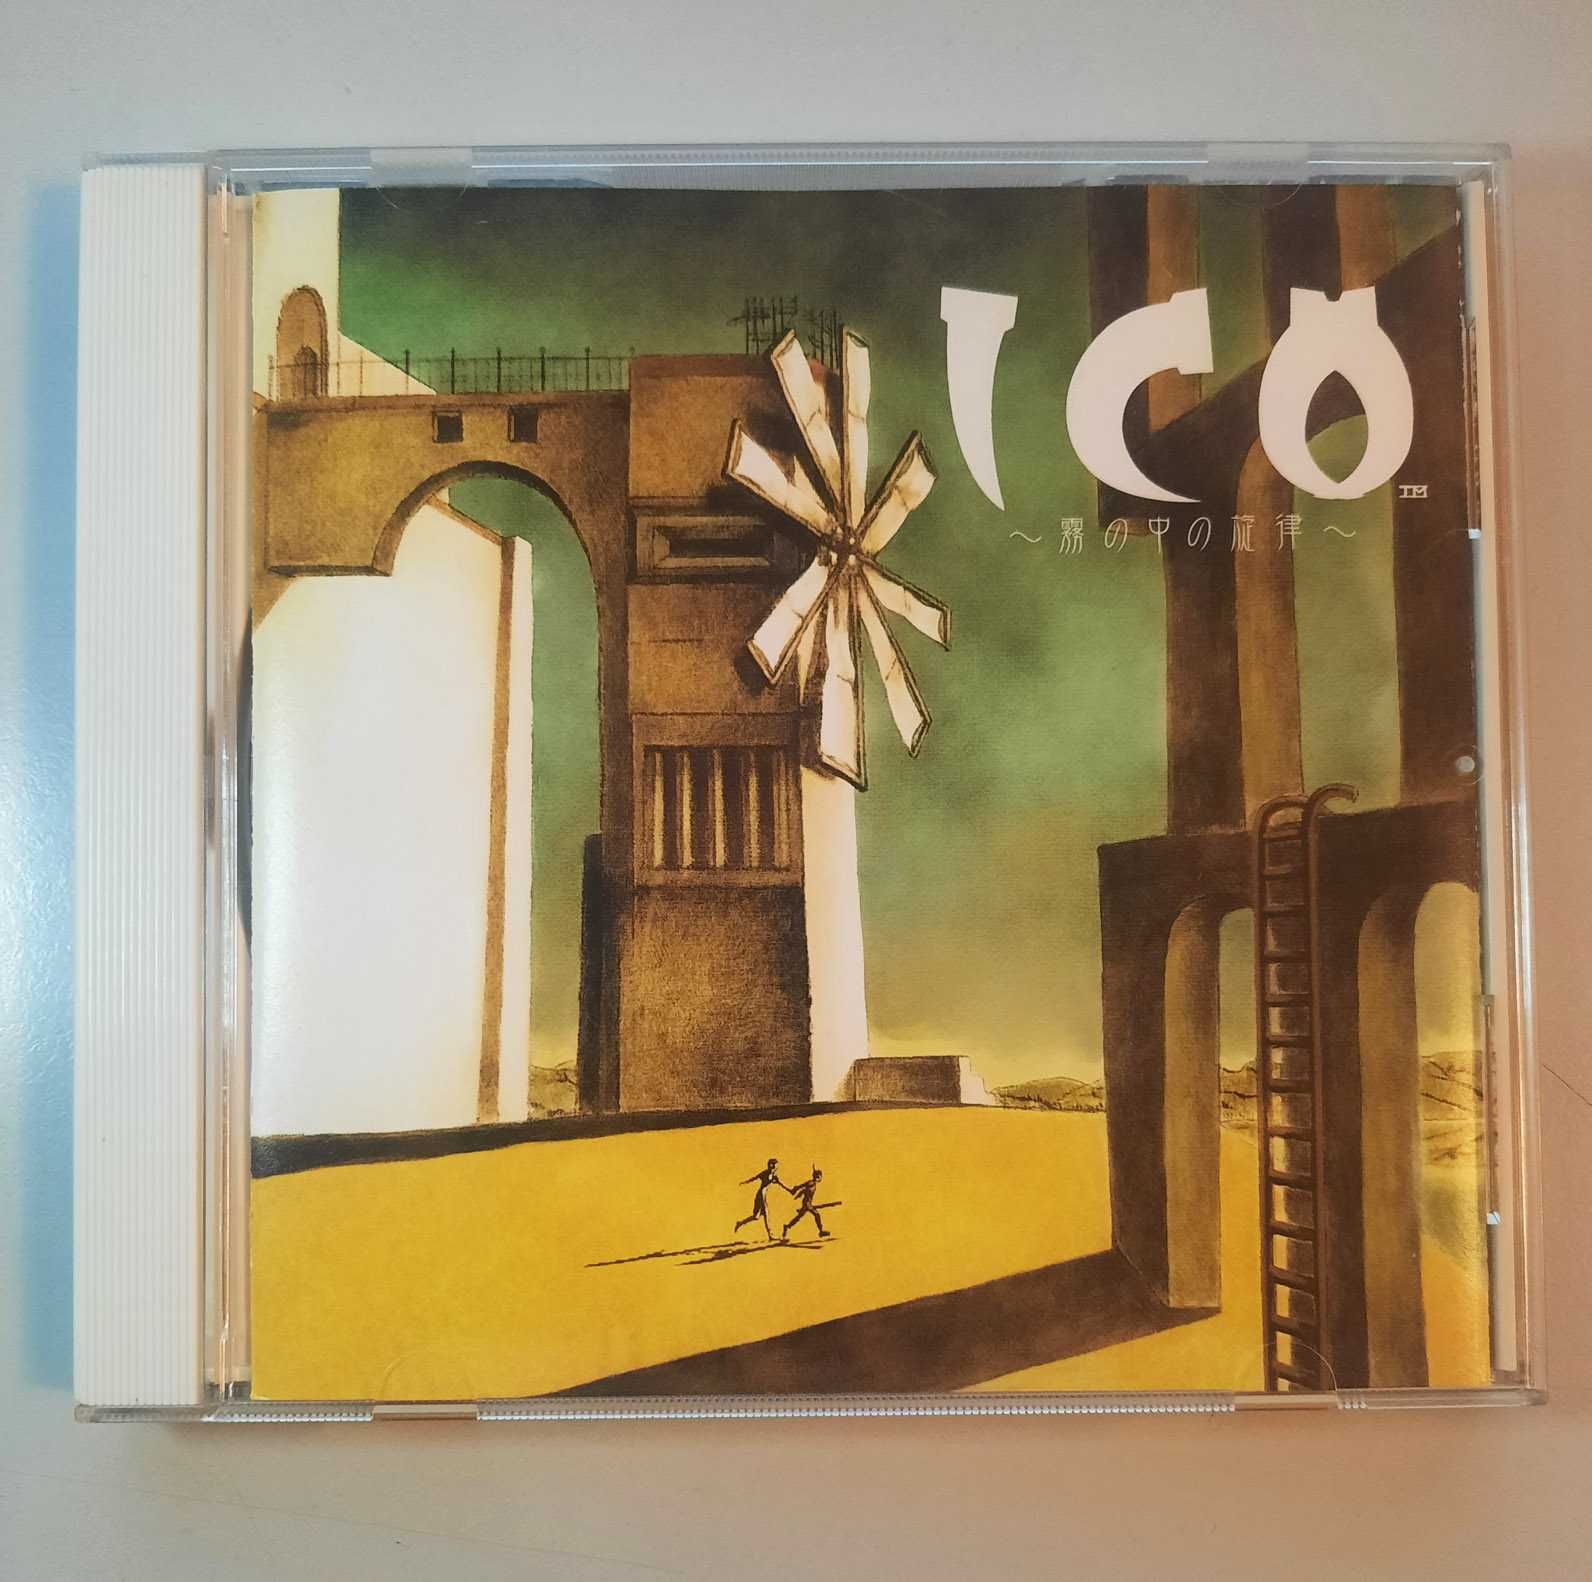 ICO: Melody in the Mist - Soundtrack